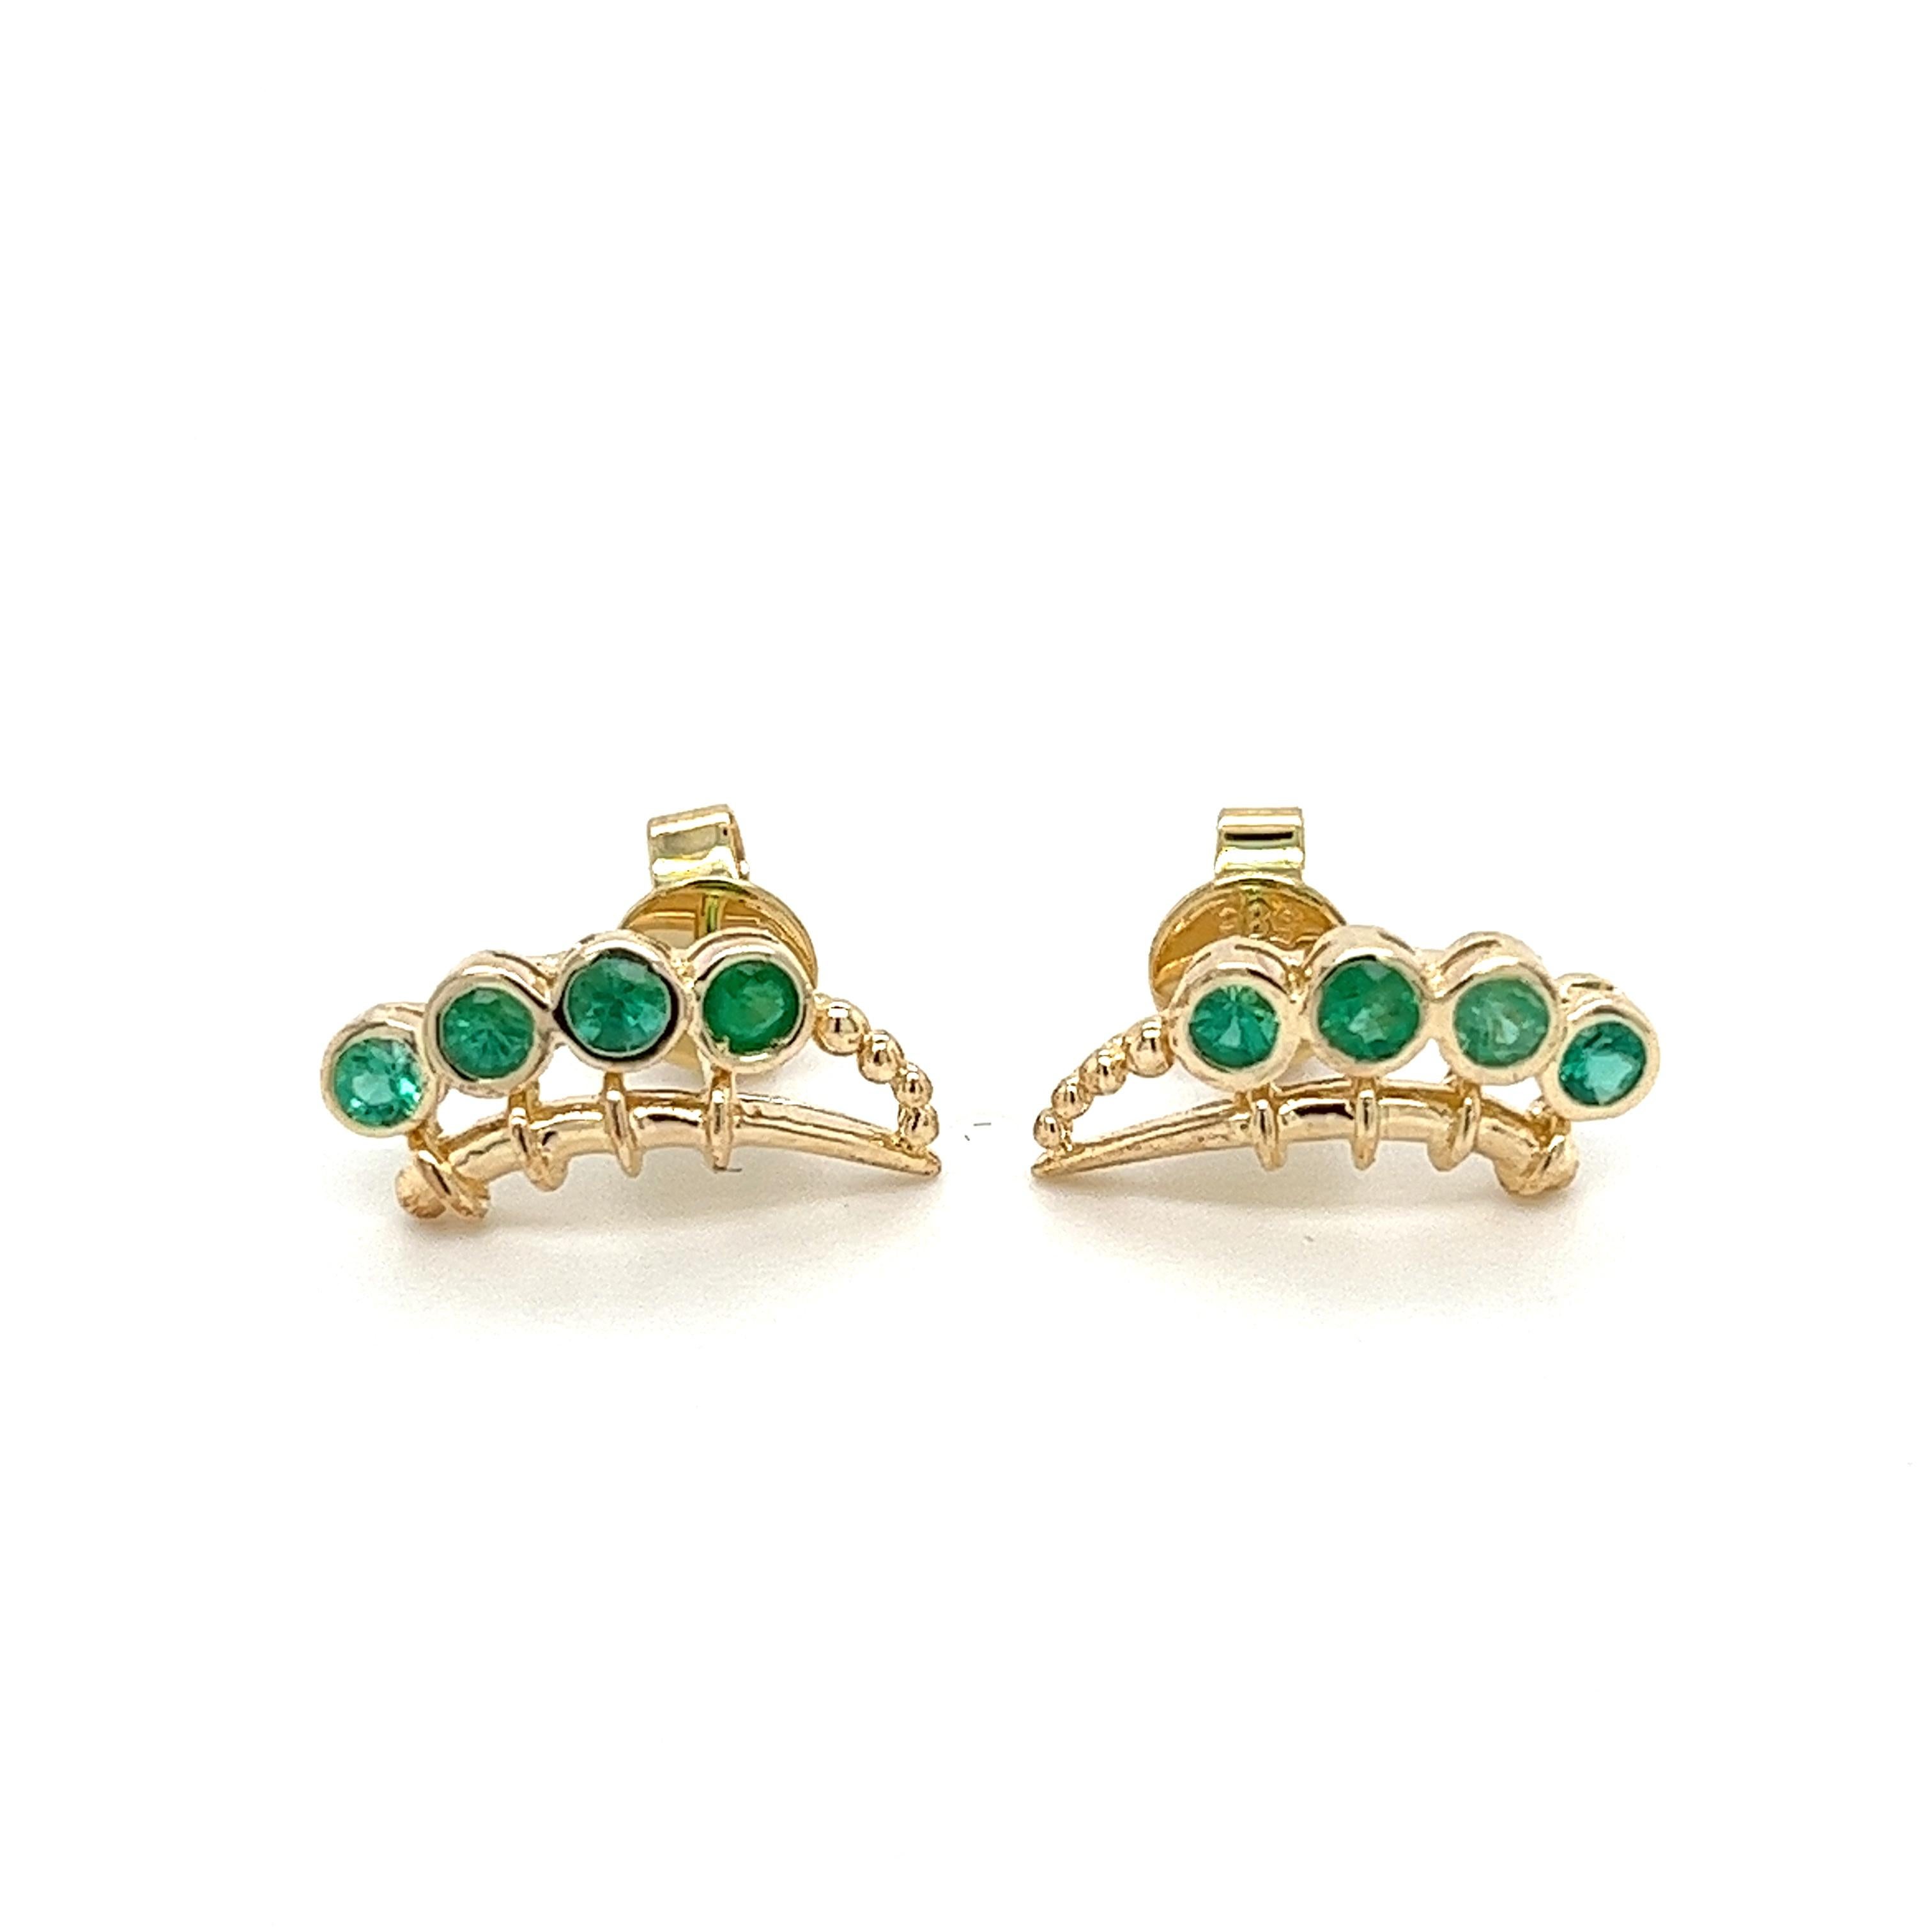 14K solid yellow gold ear climber stud earrings set with 8 natural round cut emeralds. A gorgeous display of contrast and grace. Aesthetically versatile enough for cartilage and earlobe placement.

FEATURES: Earring box + travel pouch, and a